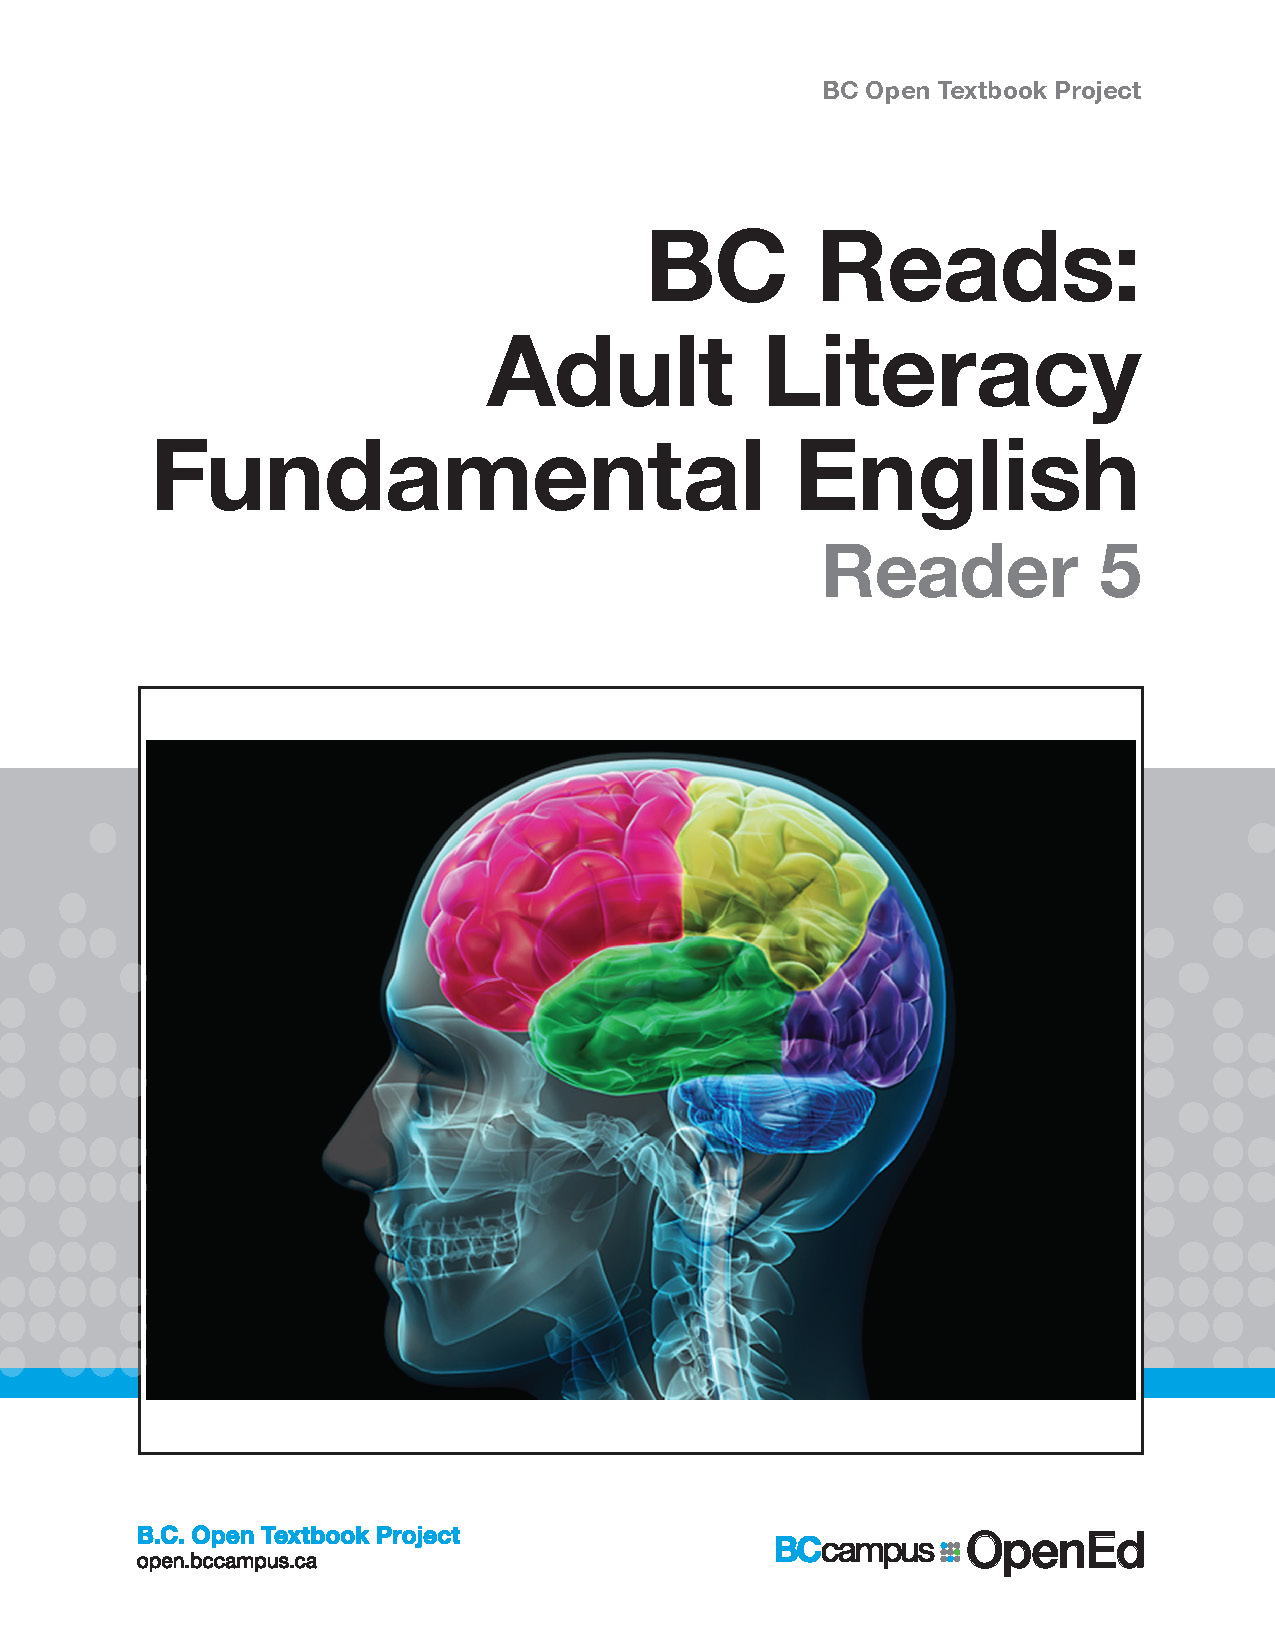 Cover image for Adult Literacy Fundamental English - Reader 5